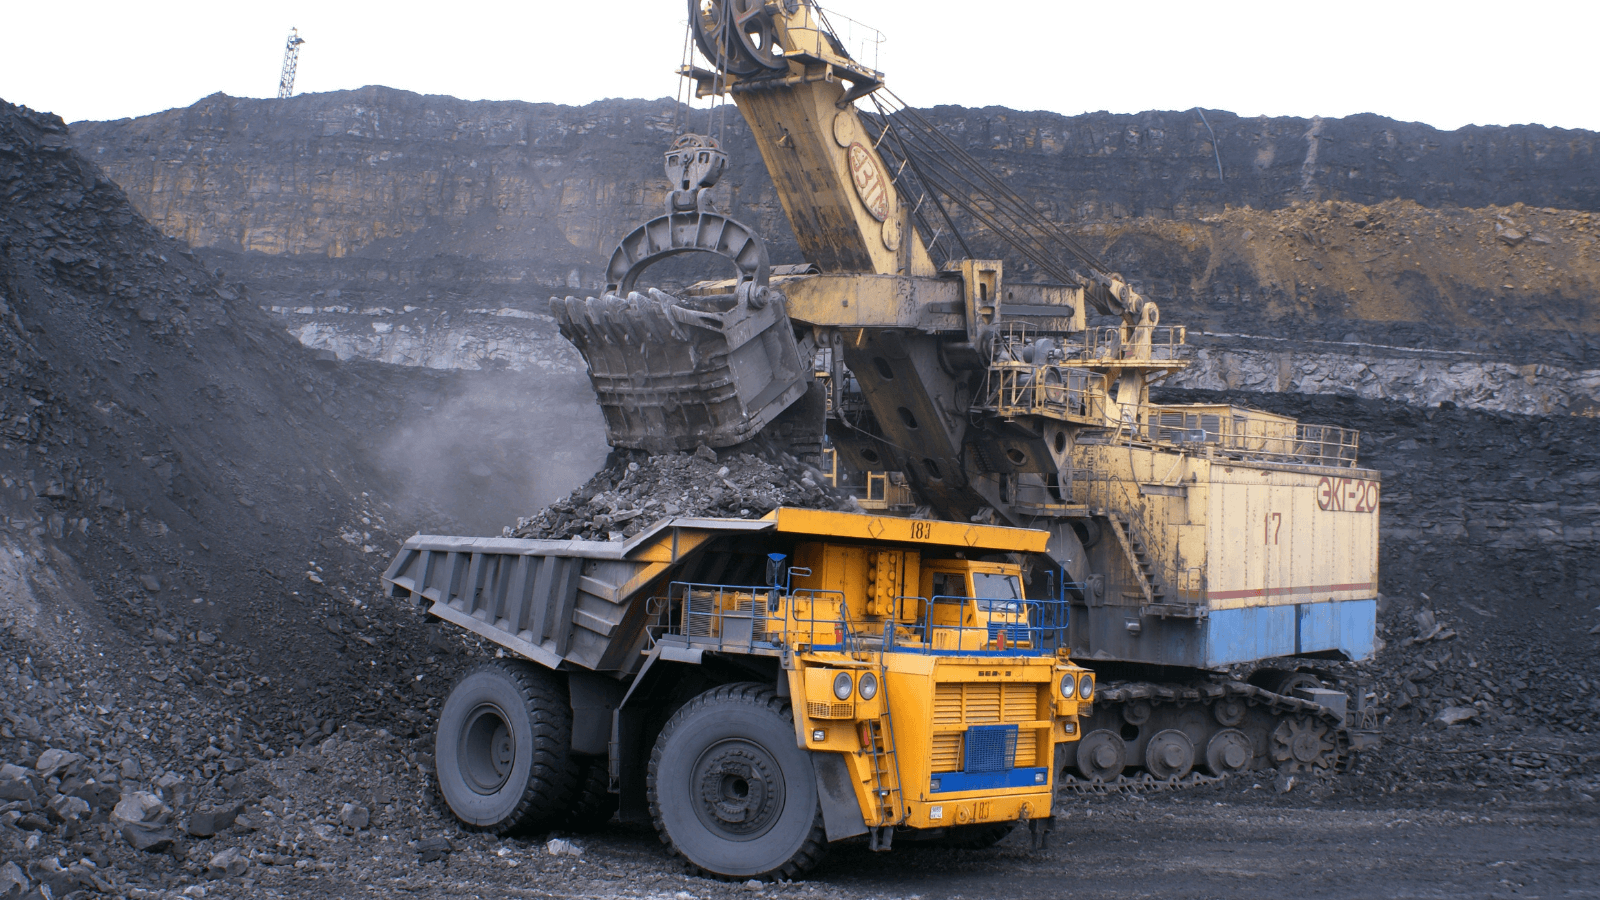 Sushee Infra & Mining (SIML)-MRKR Consortium (SIML is the lead member) has emerged as the lowest (L1) bidder for development and operationalisation of Chandragupt OCP in the state of Jharkhand. In February 2021, Central Coalfields had issued global tenders for development and operationalisation of Chandragupt OCP in mine developer and operator (MDO) mode for a period 25 years through a mine operator for excavation of coal and delivery thereof to the Authority. Apart from SIML, the tender saw participation from Adani Enterprises and Montecarlo. The project located in North Karanpura Coalfields, Hazaribagh district of Jharkhand. The value of the contract is Rs 21,956.64 crore with a contract period of 25 years.